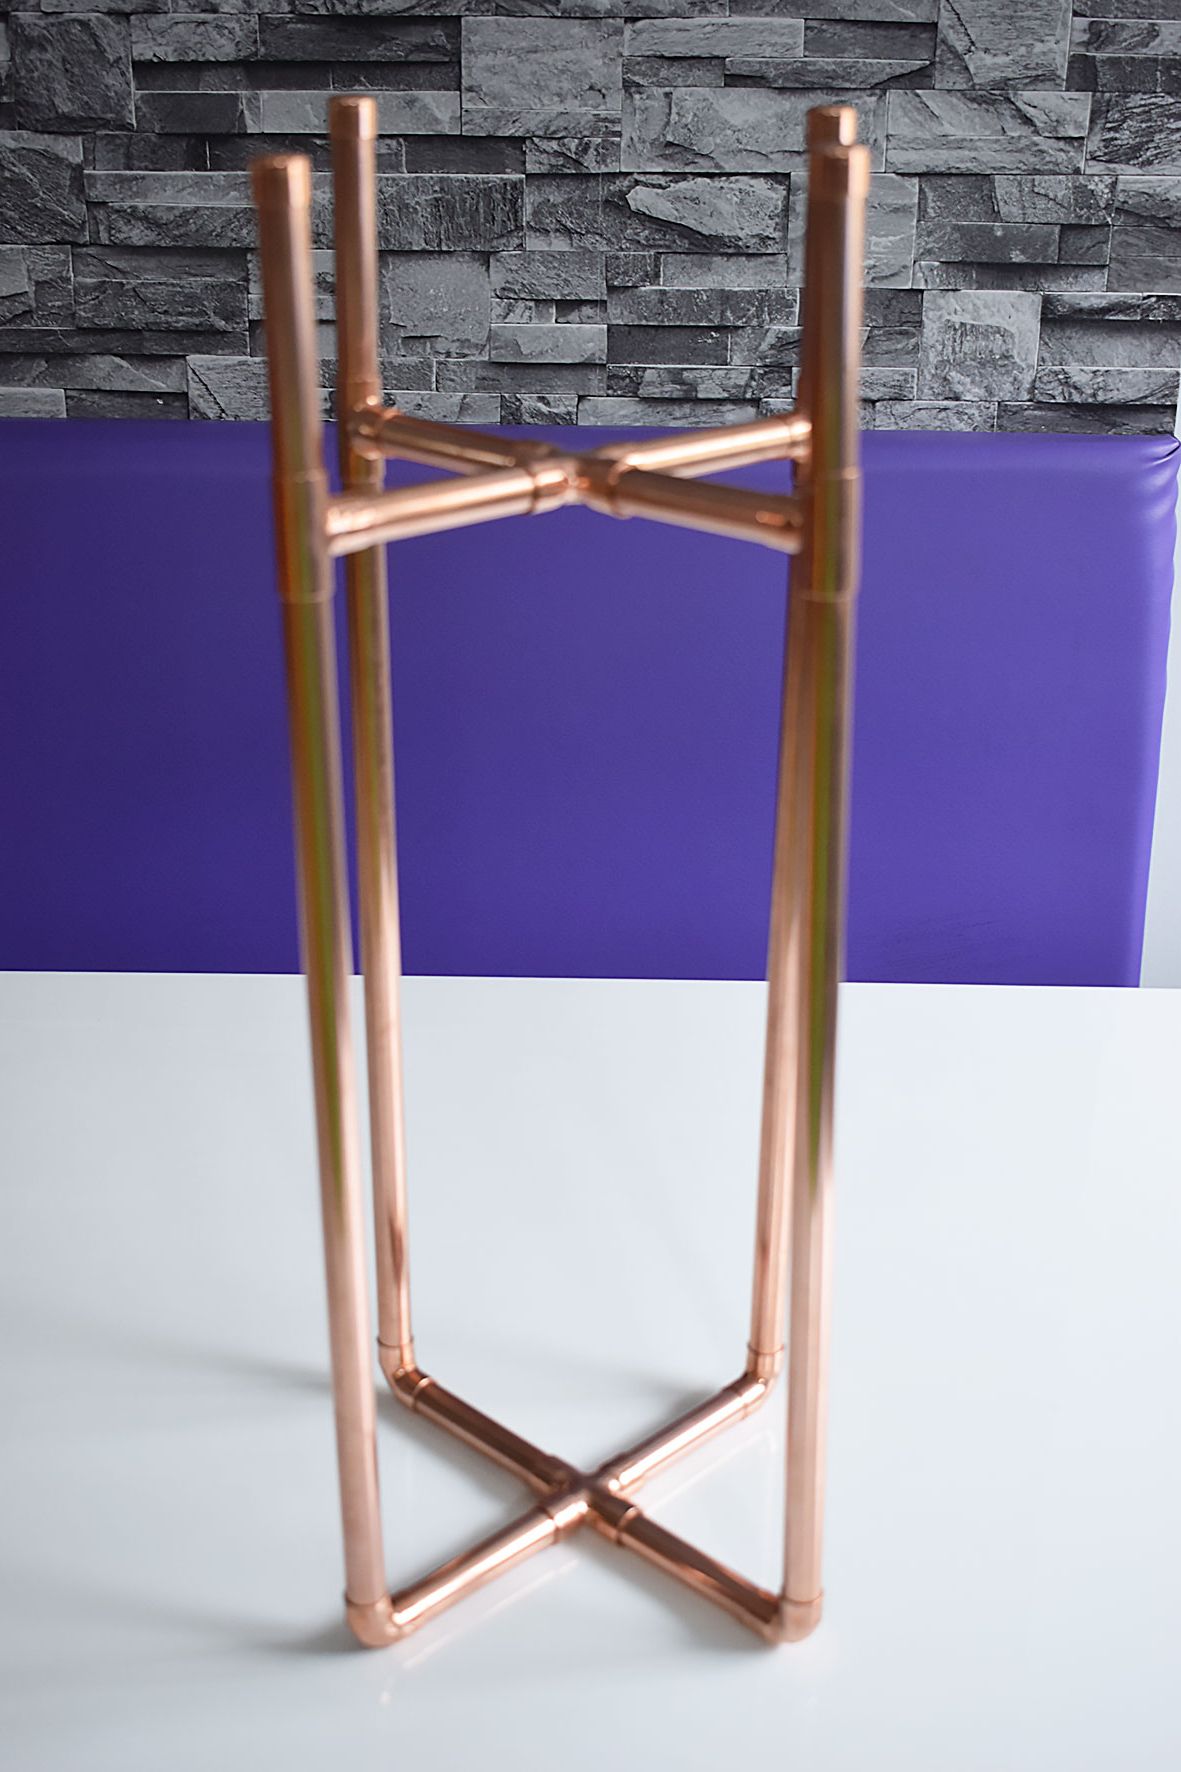 Copper Plant Stands In Widely Used How To Make A Diy Copper Plant Stand – Caradise (View 12 of 15)